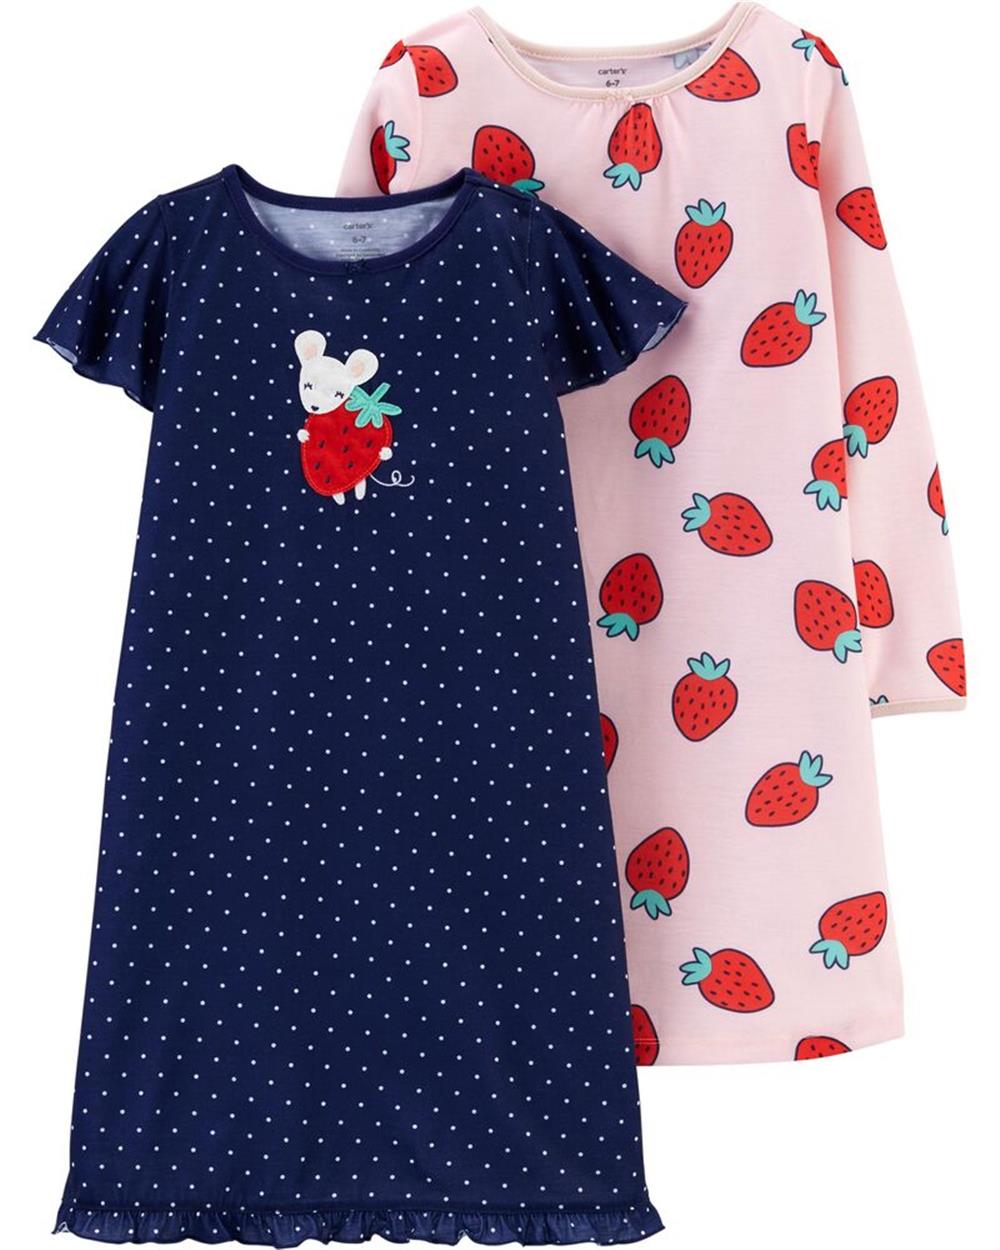 Carters Girls 2-14 Strawberry 2-Pack Night Gown